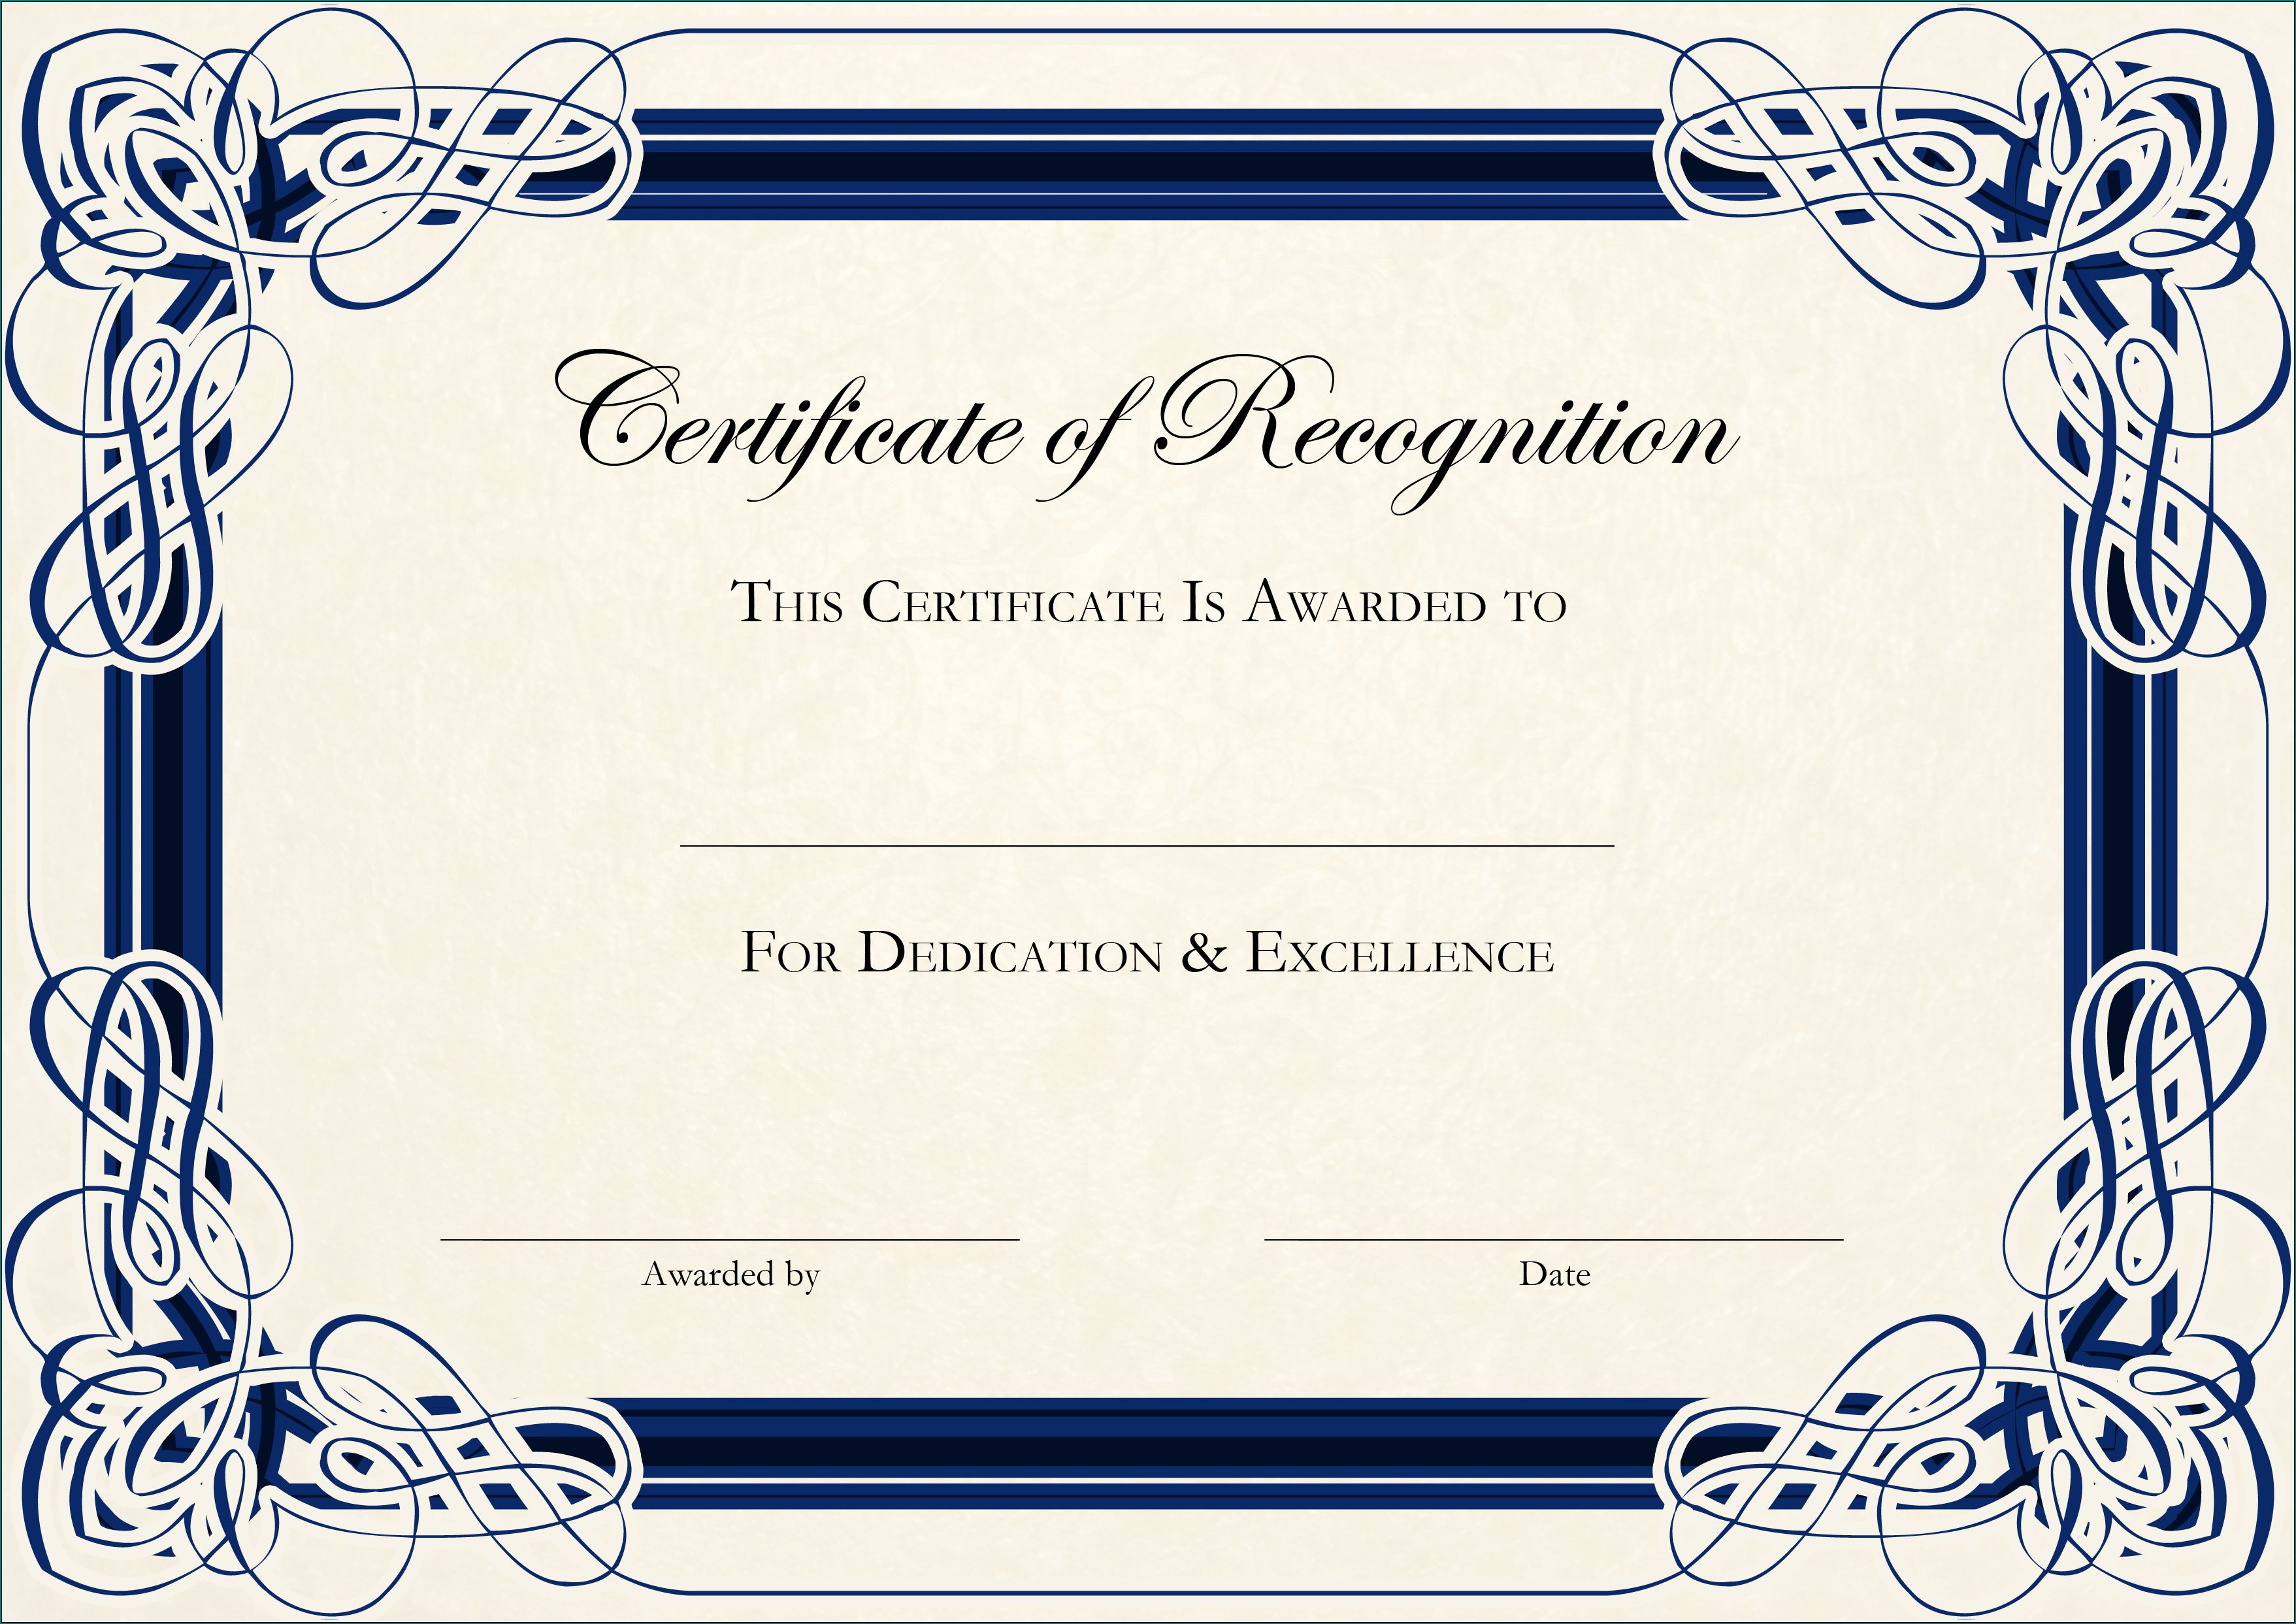 Example of Certificate Of Recognition Template